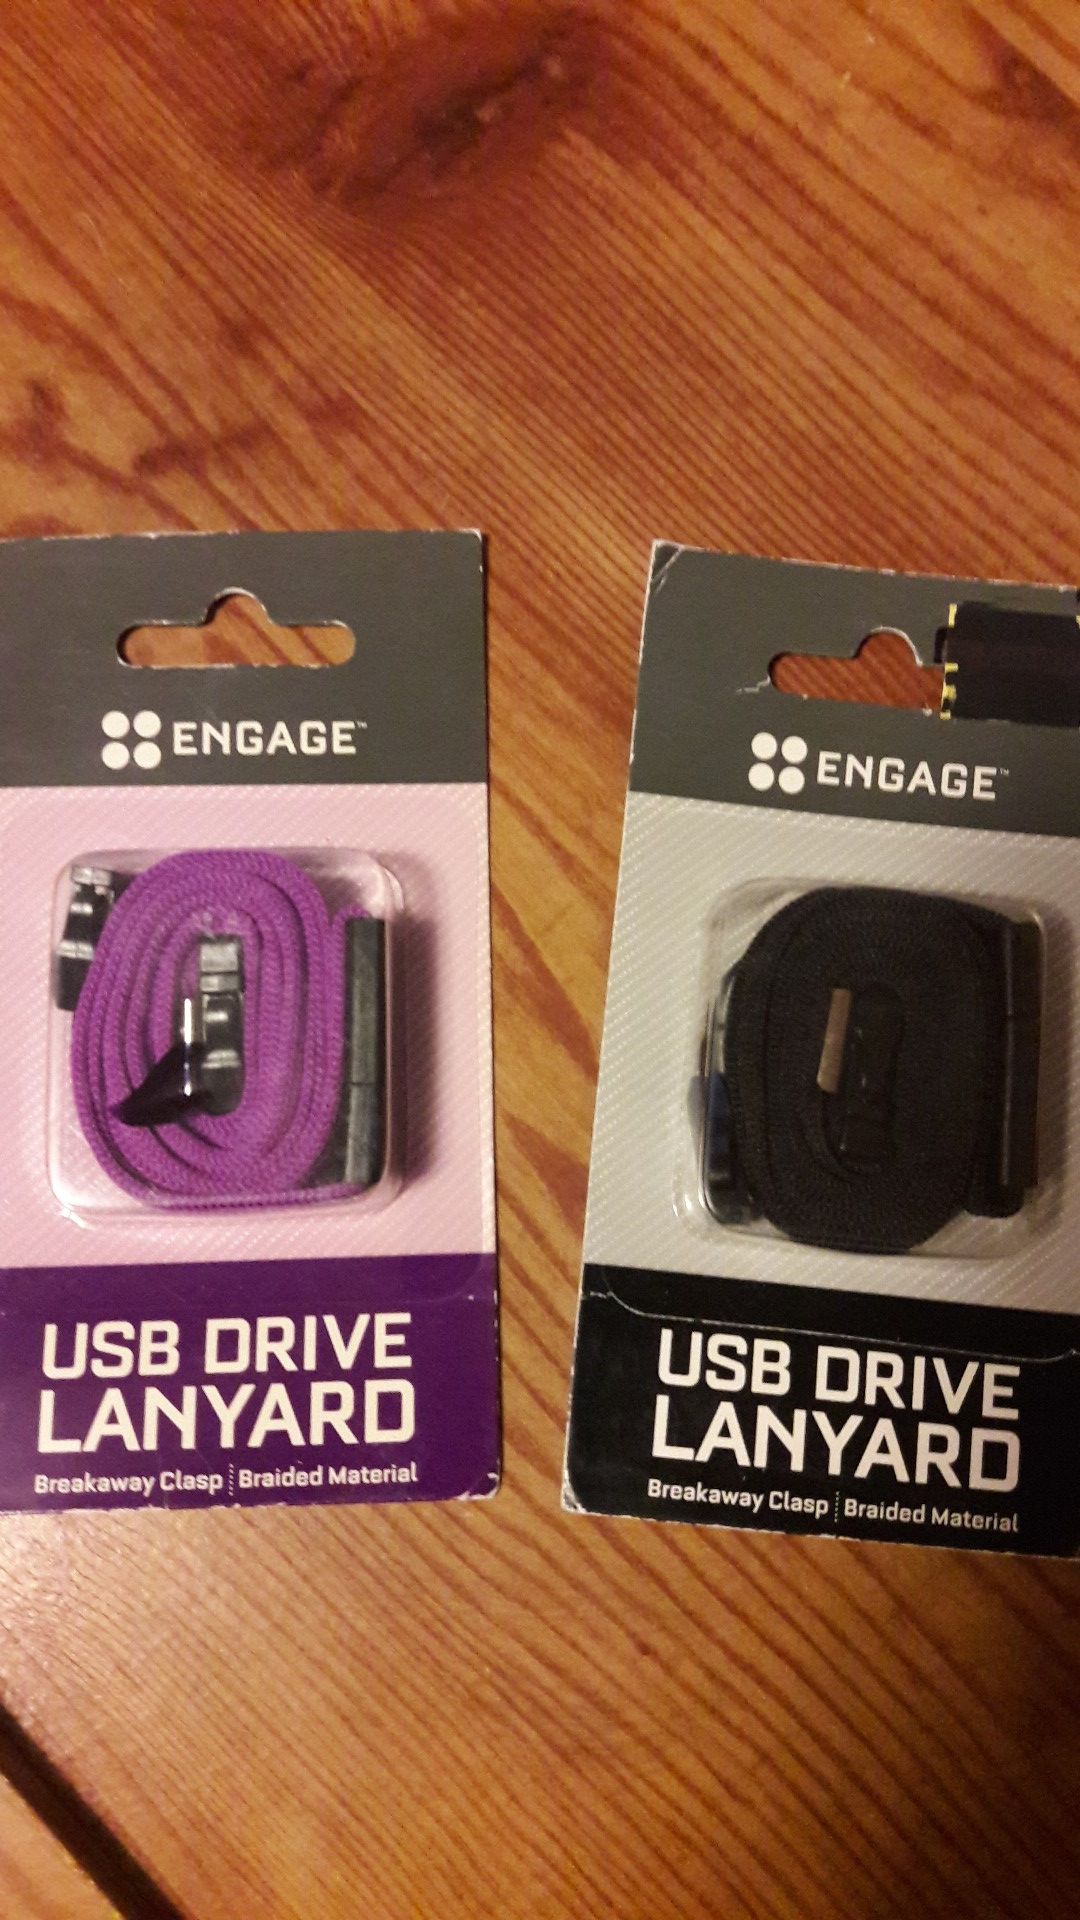 USB Drive Lanyards. Both for $6